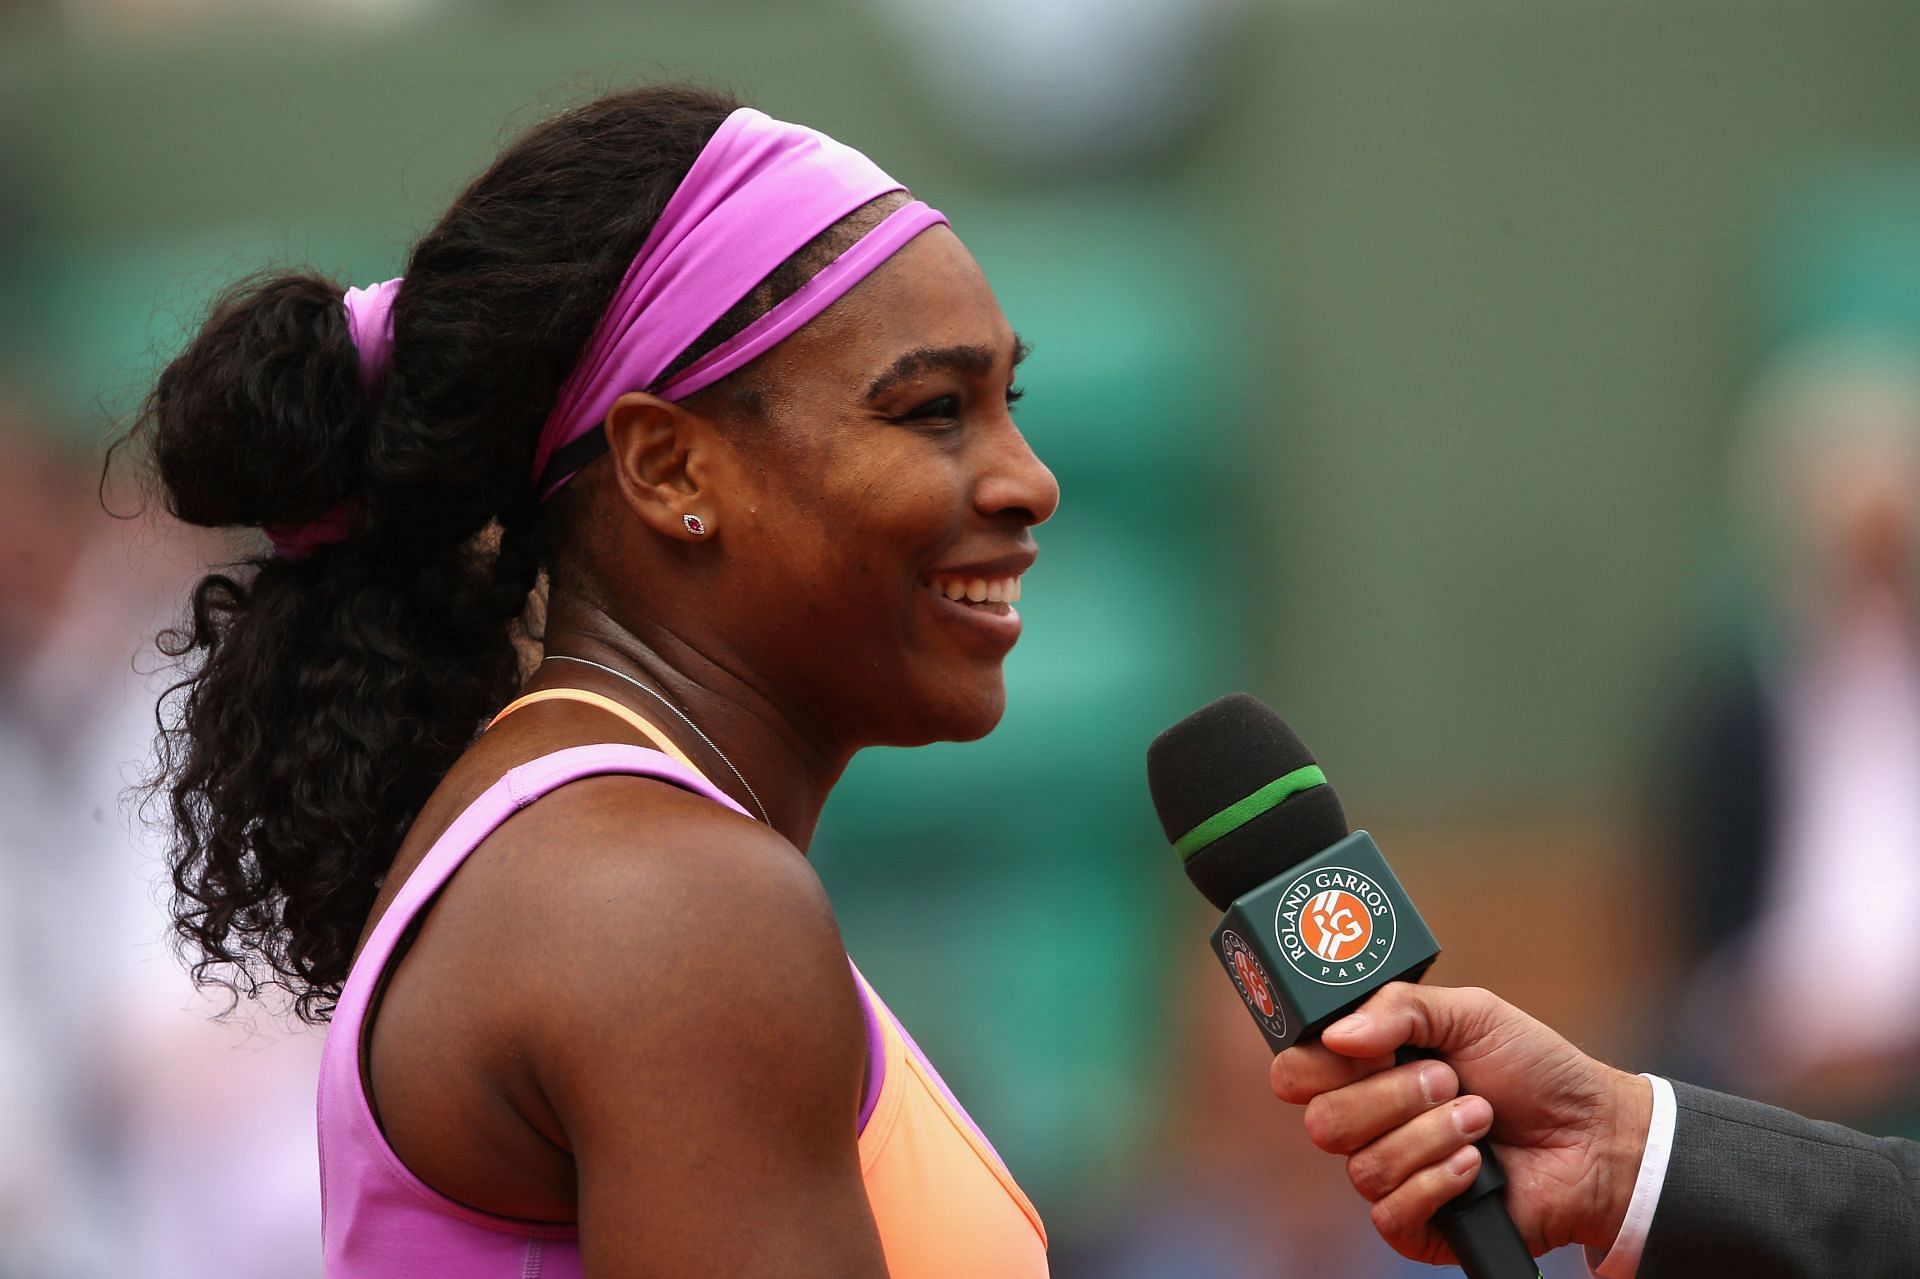 Serena Williams spoke about her challenges after quitting the game